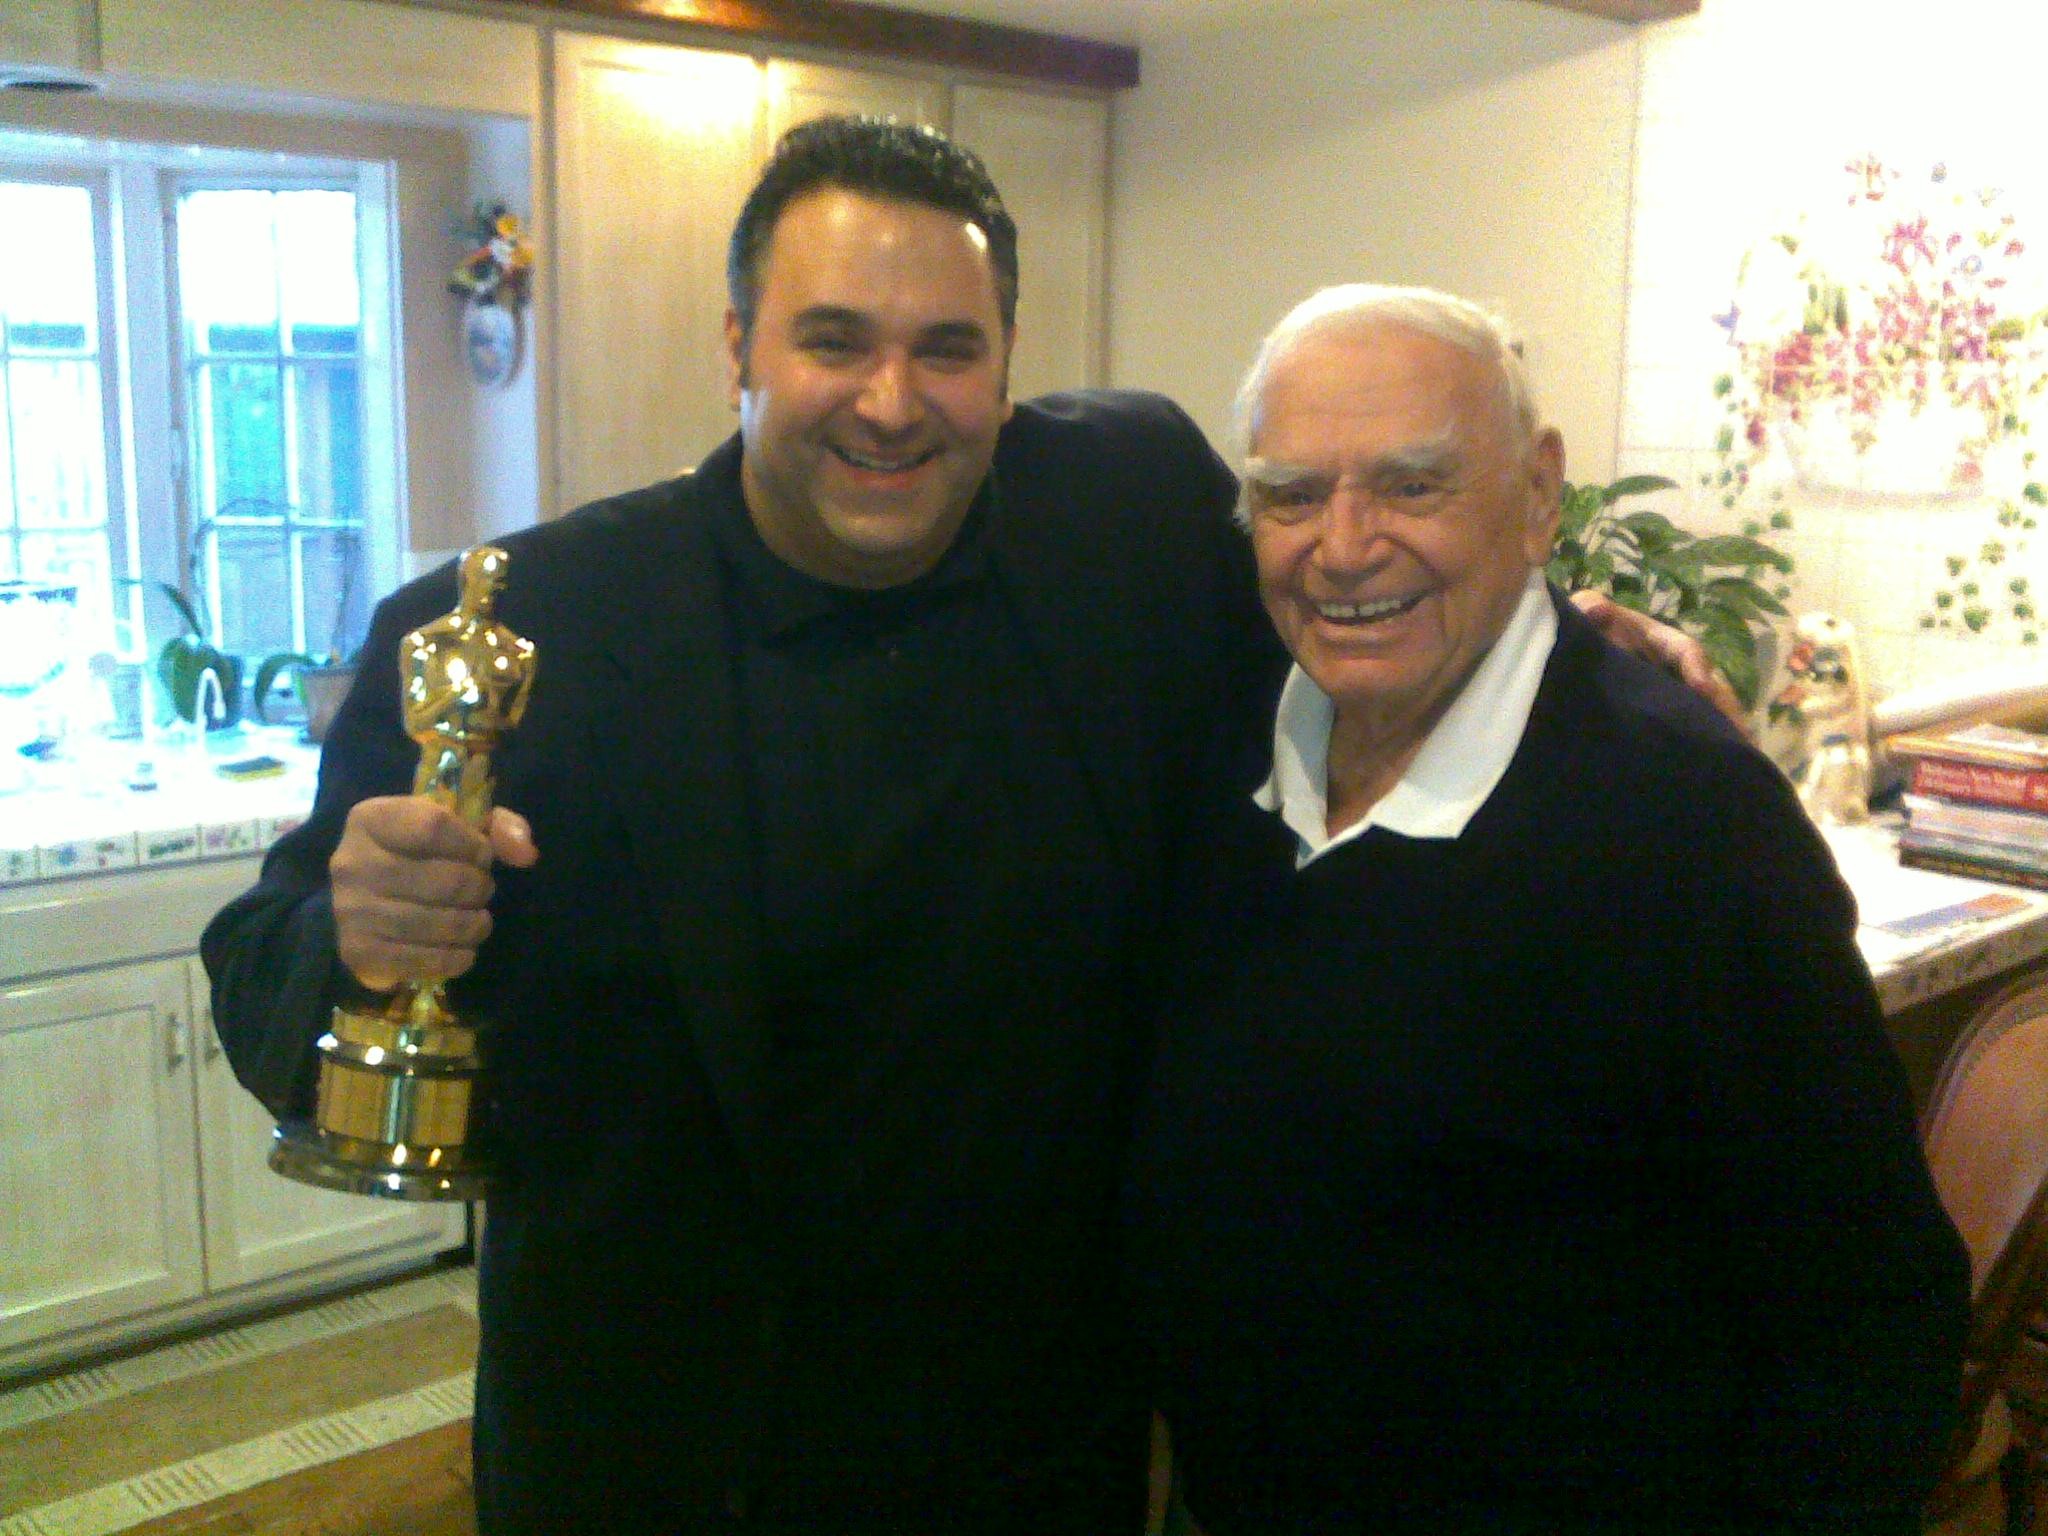 Director/Producer Sam Borowski, left, poses with Ernest Borgnine, who he is directing in the movie NIGHT CLUB, and his Best Actor Oscar, won for MARTY, in March, 2010.